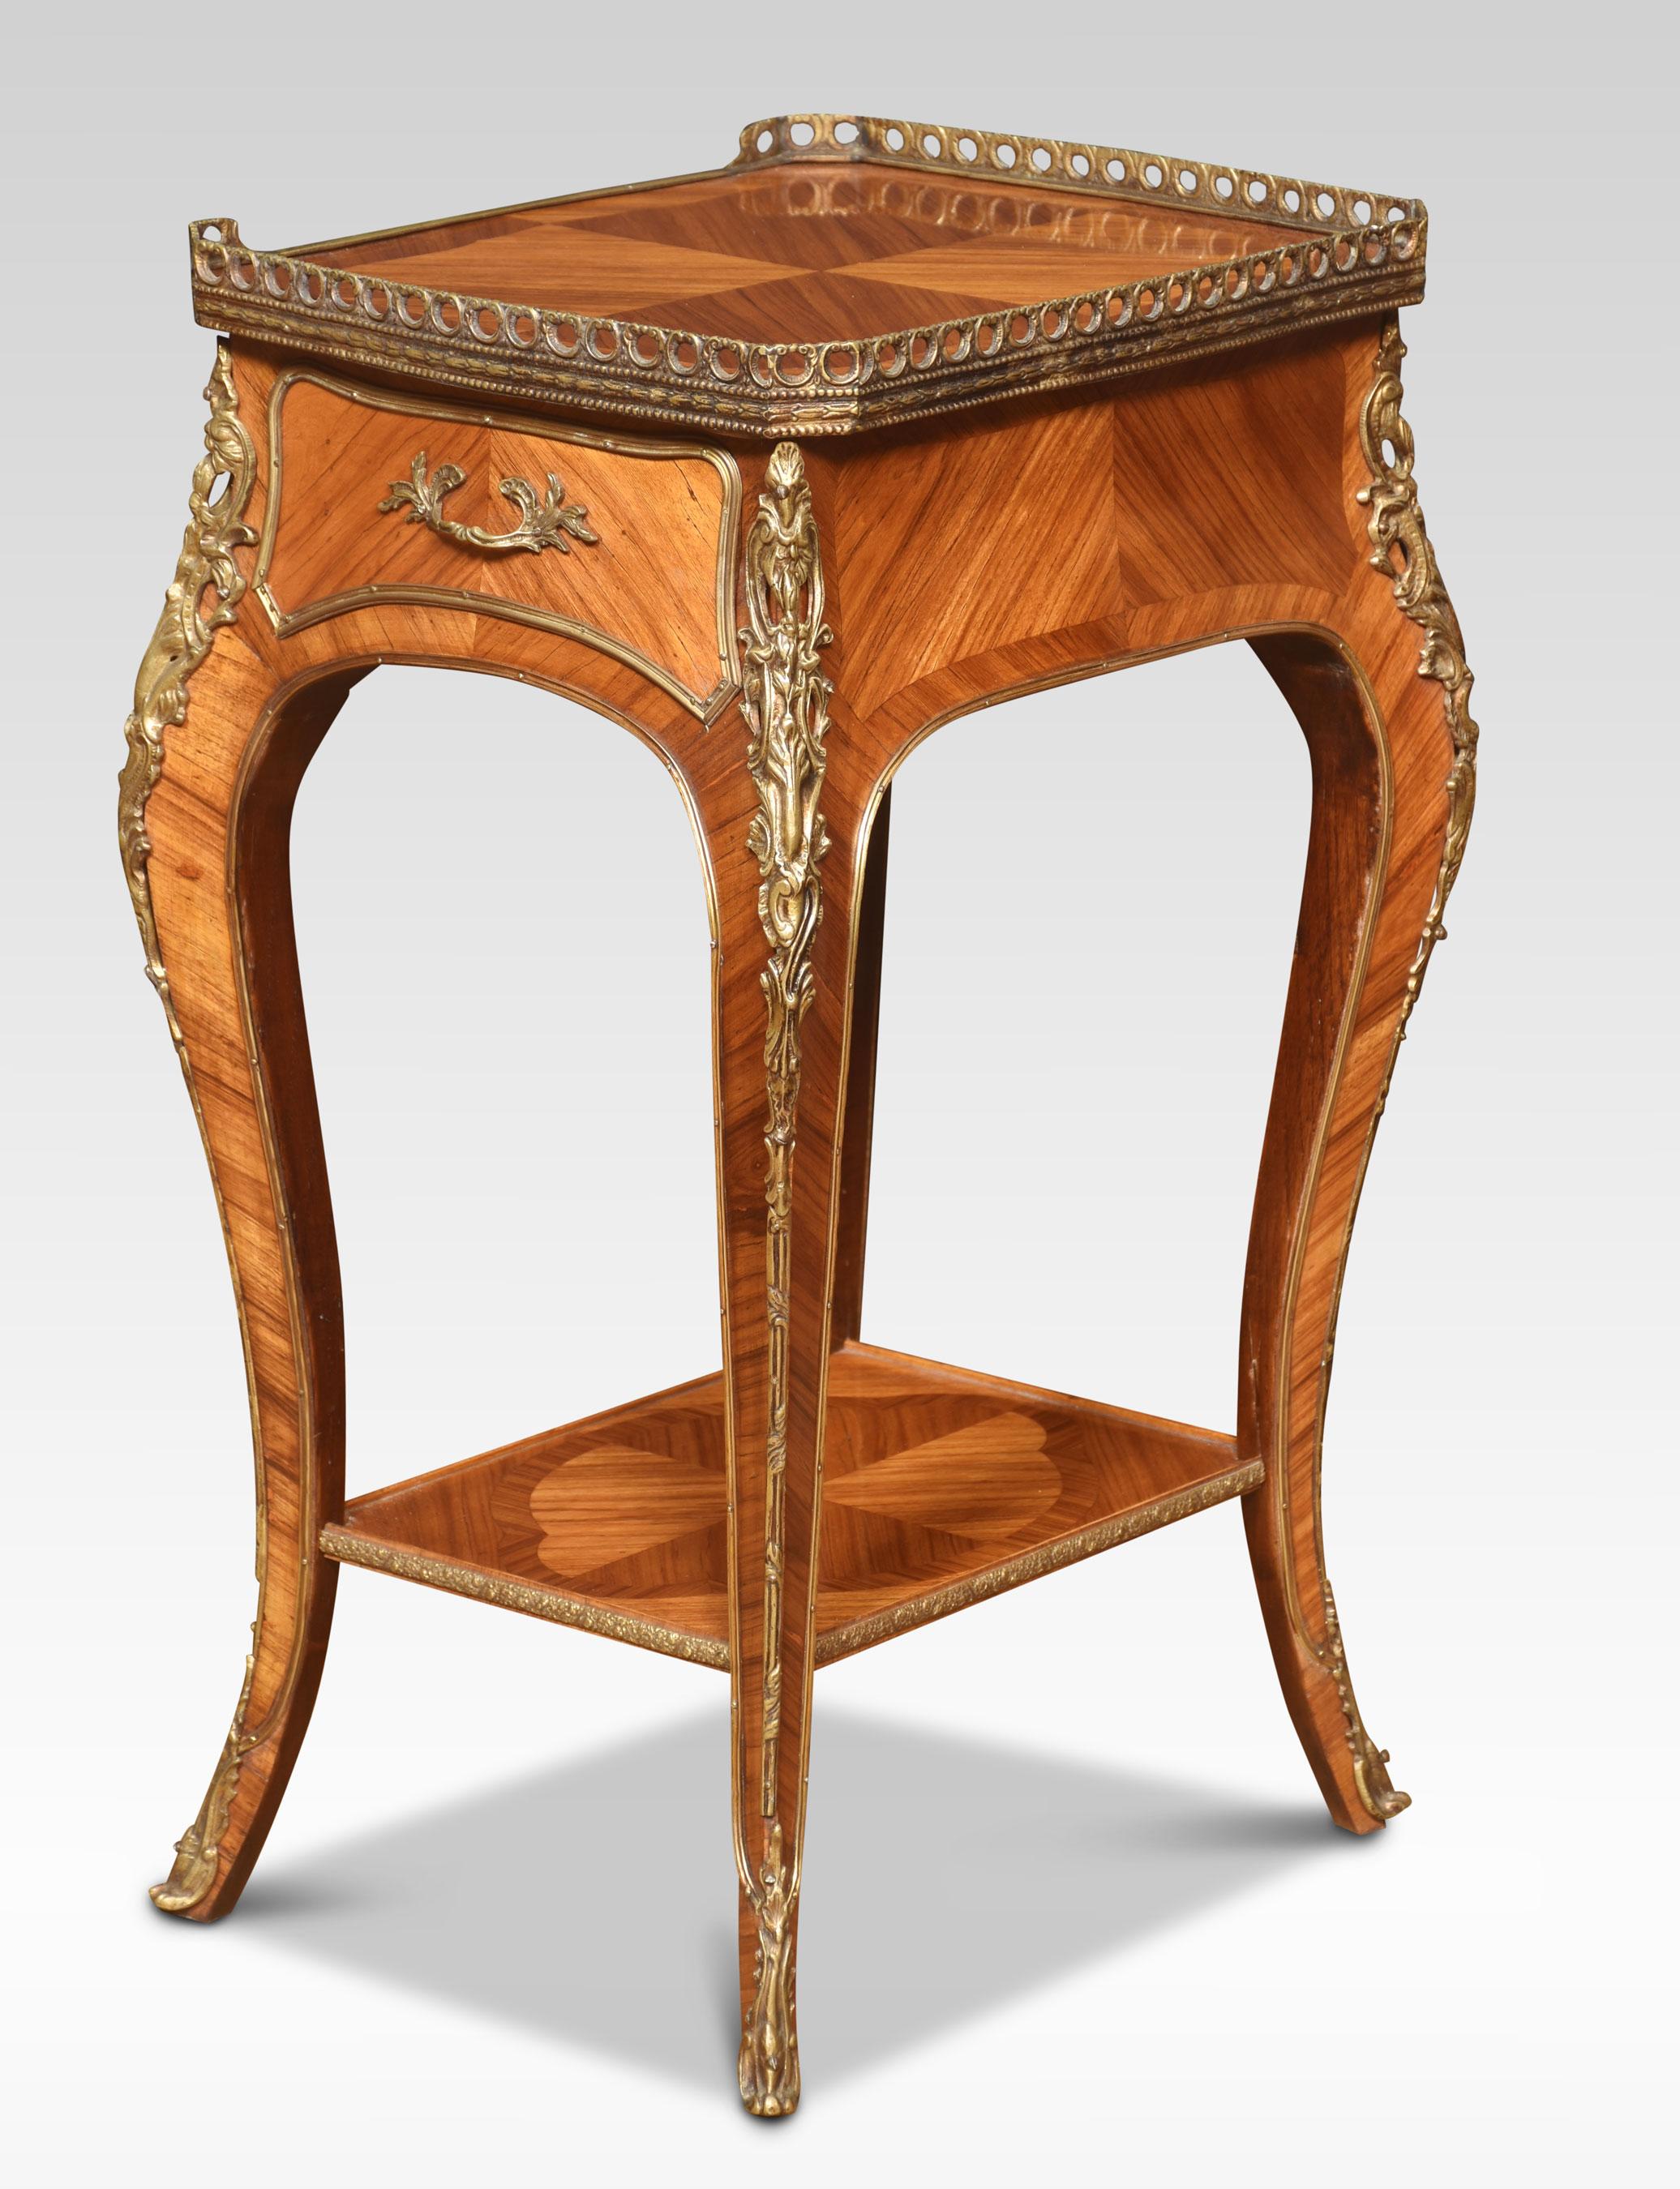 Pair of walnut bedside tables the raised three-quarter pierced gallery above well-figured quarter veneered tops. To the freeze with a single drawer having a well-cast handle, to the side a pull-out slide with inset leather. All raised up on four